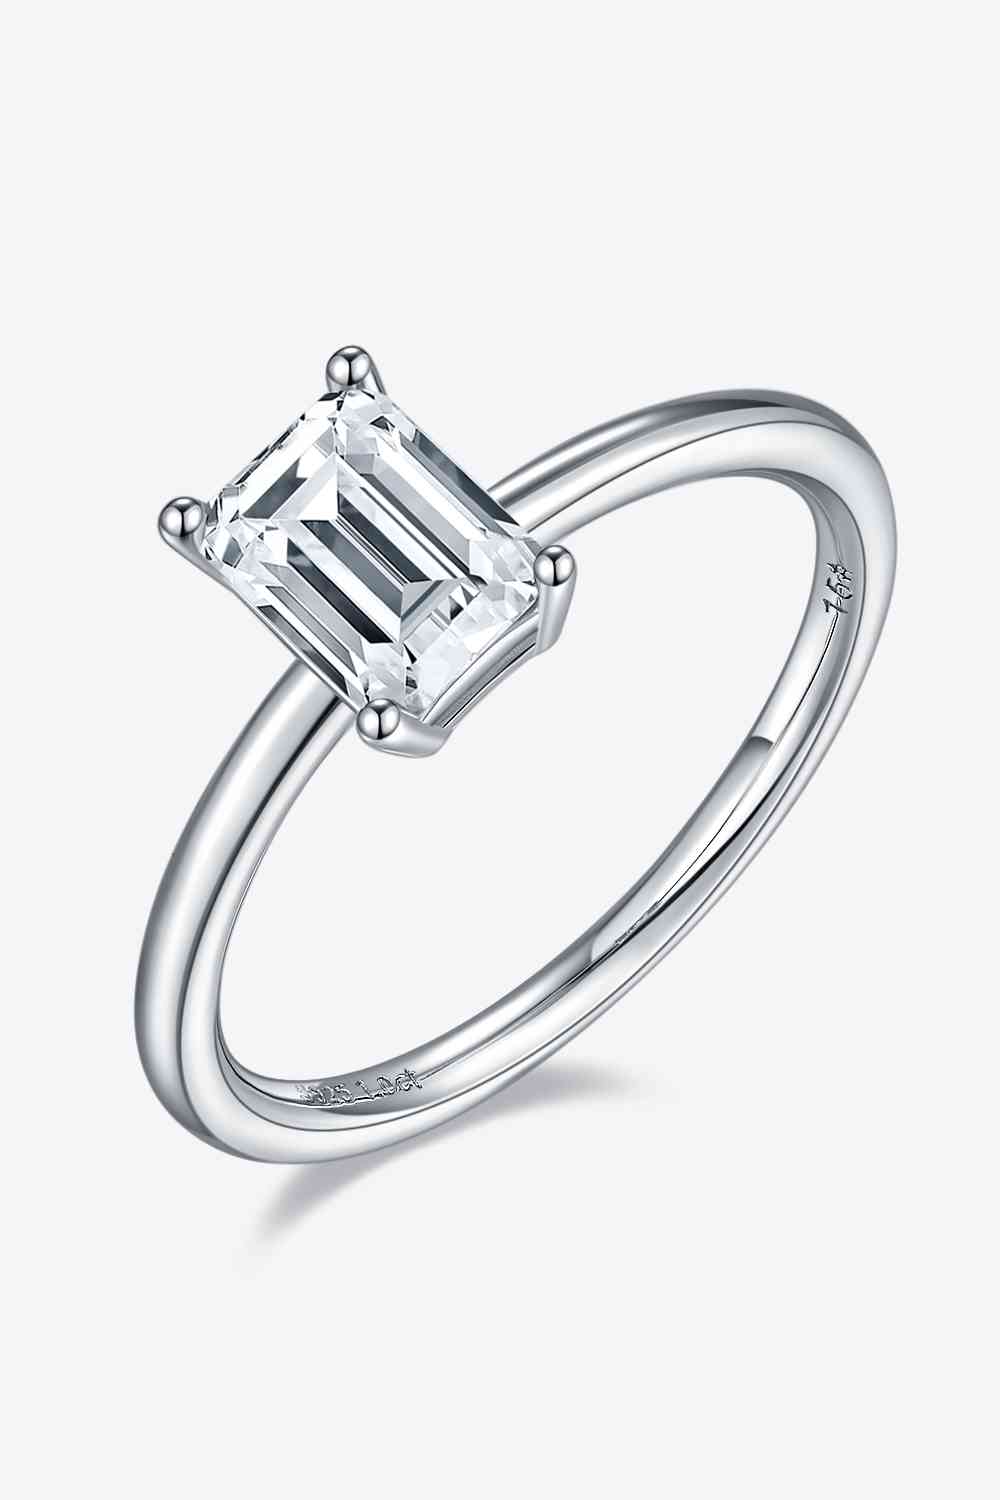 1 Carat Moissanite 925 Sterling Silver Solitaire Ring Rectangle